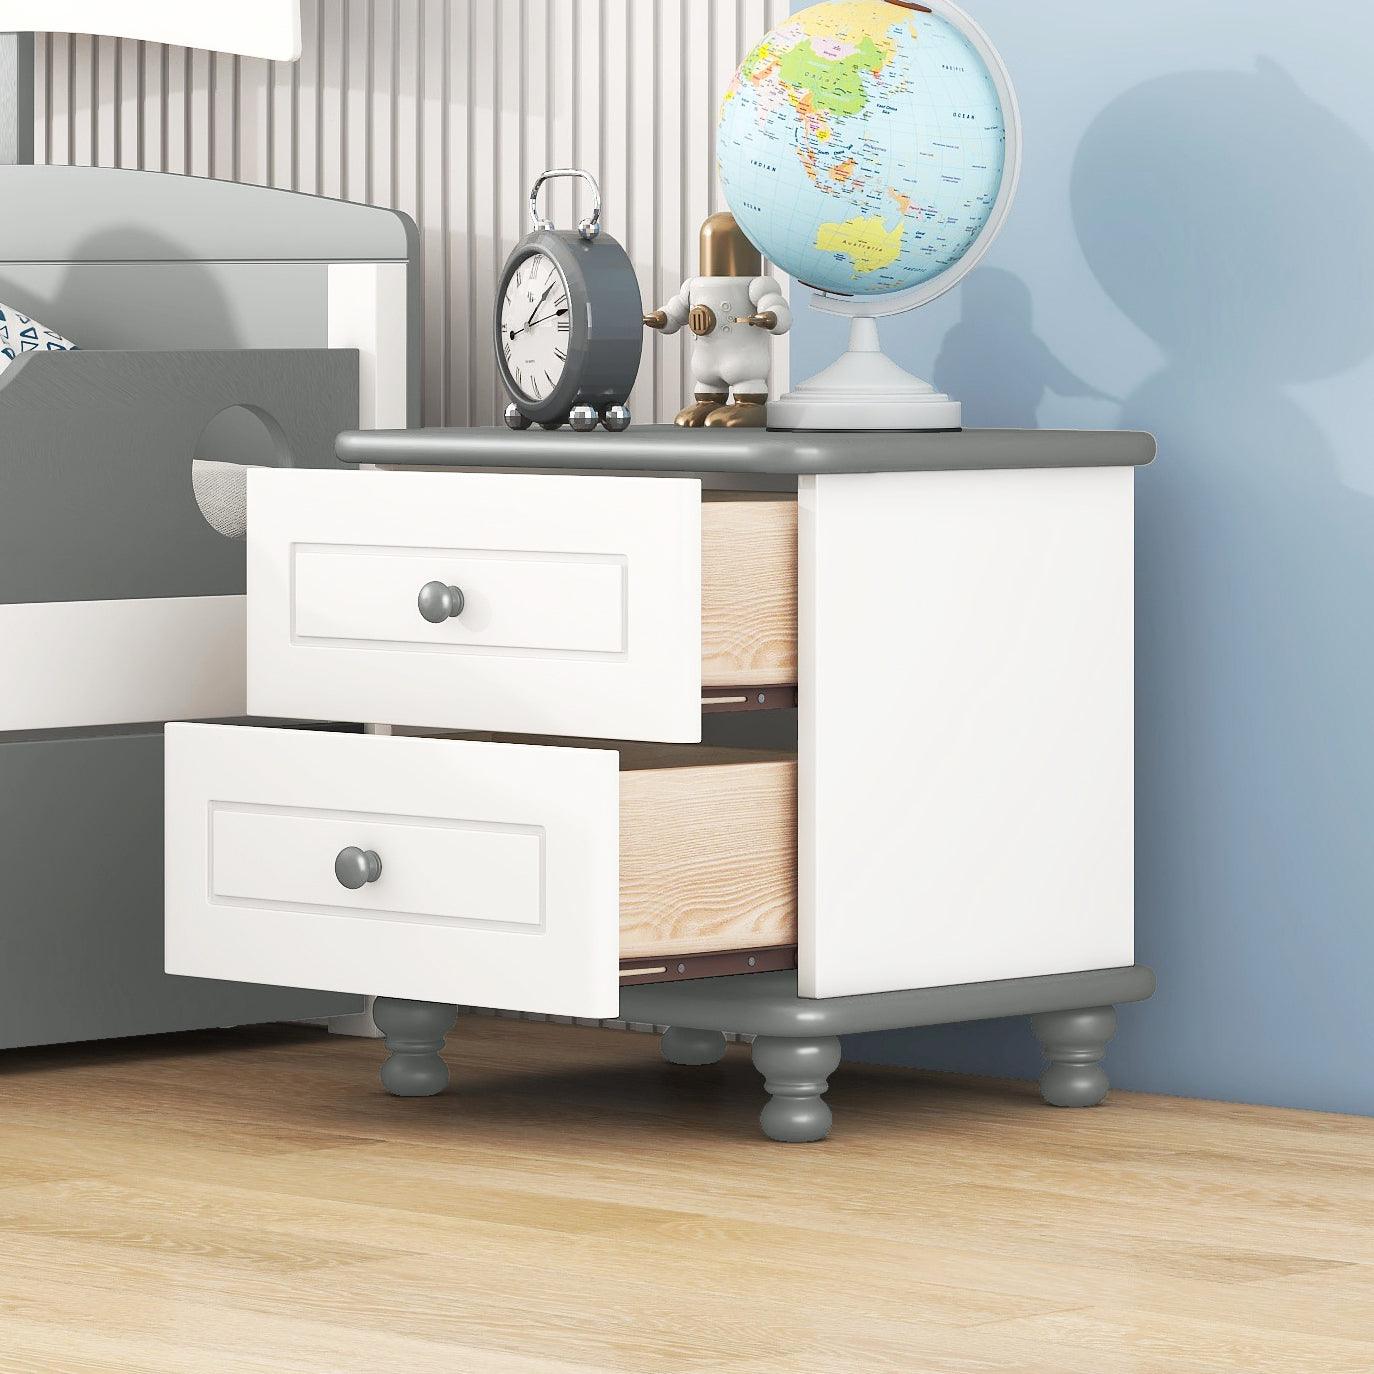 🆓🚛 Jemengro Wooden Nightstand With Two Drawers for Kids - White+Gray